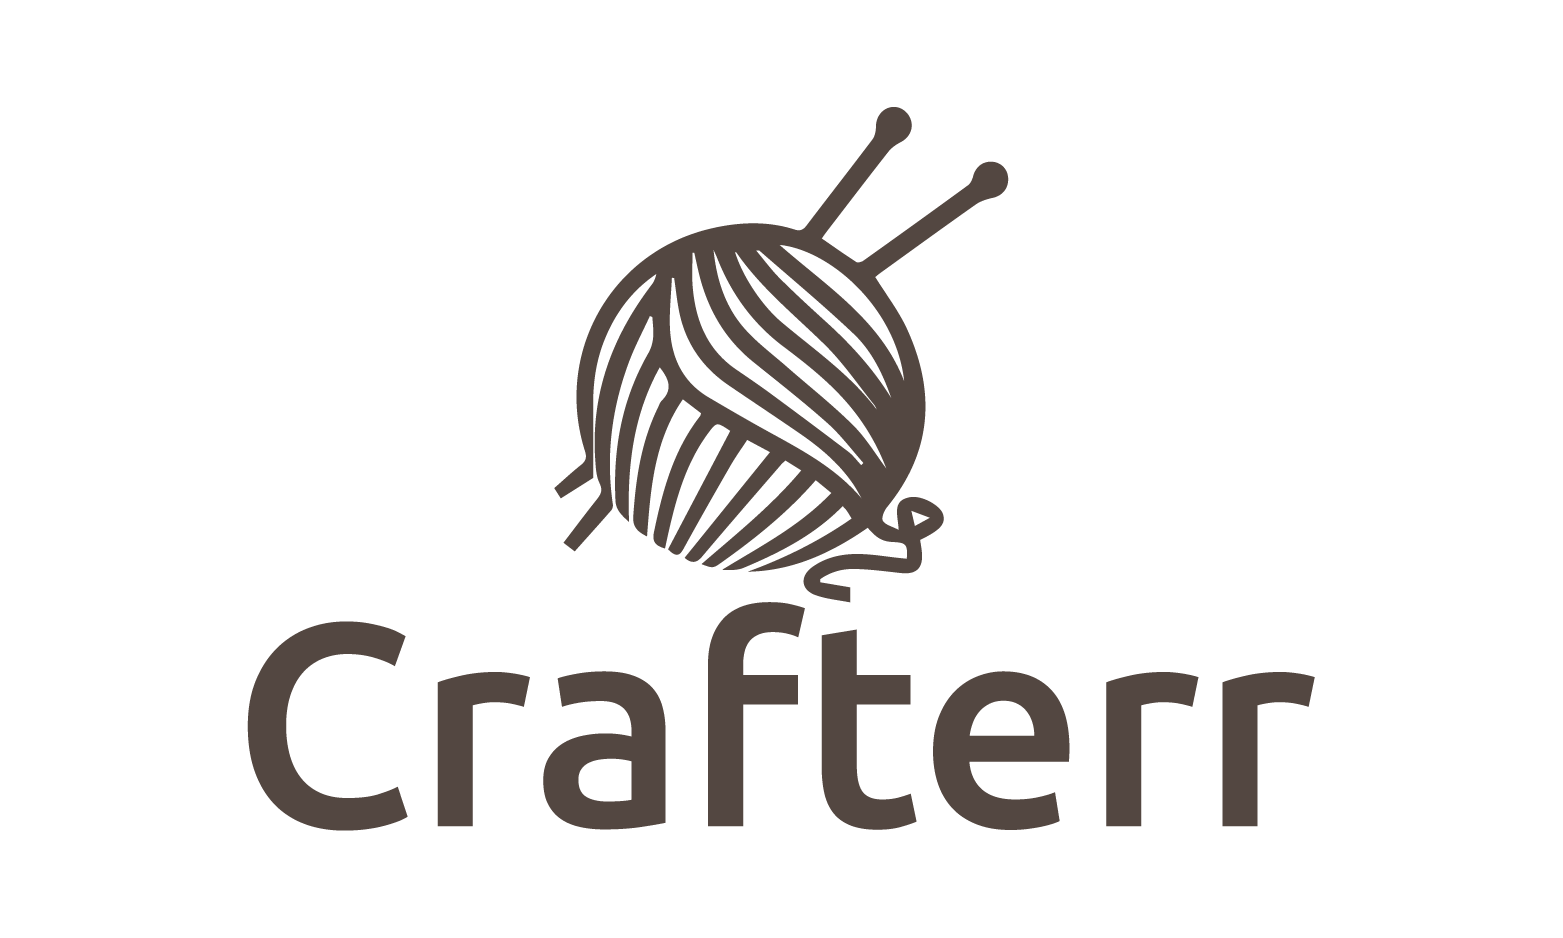 Crafterr.com - Creative brandable domain for sale